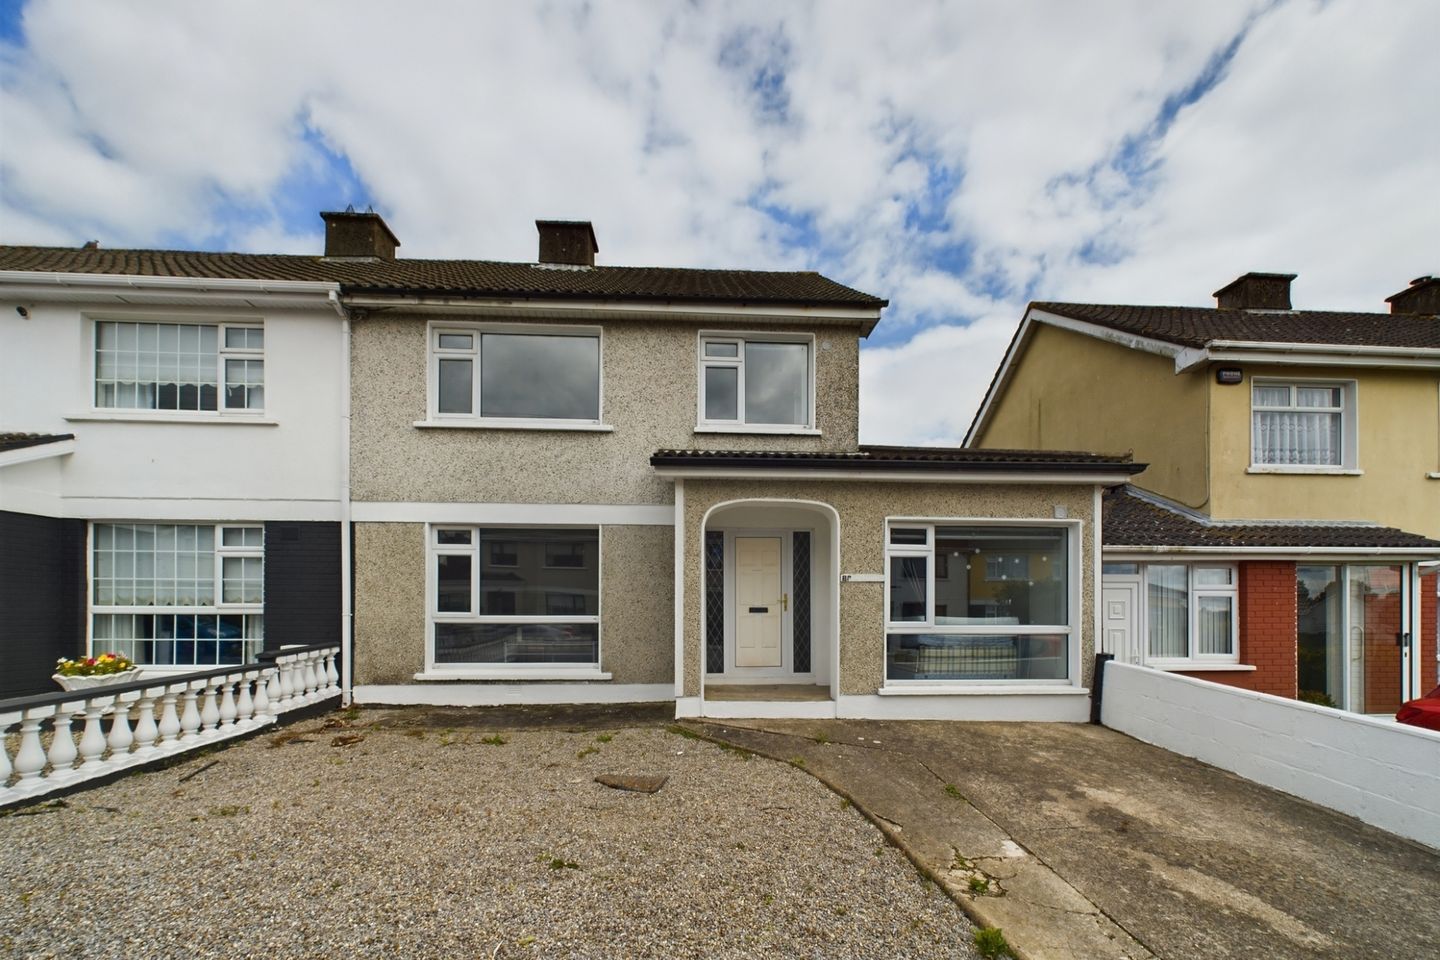 195 Lismore Park, Waterford, Waterford City, Co. Waterford, X91KXV7